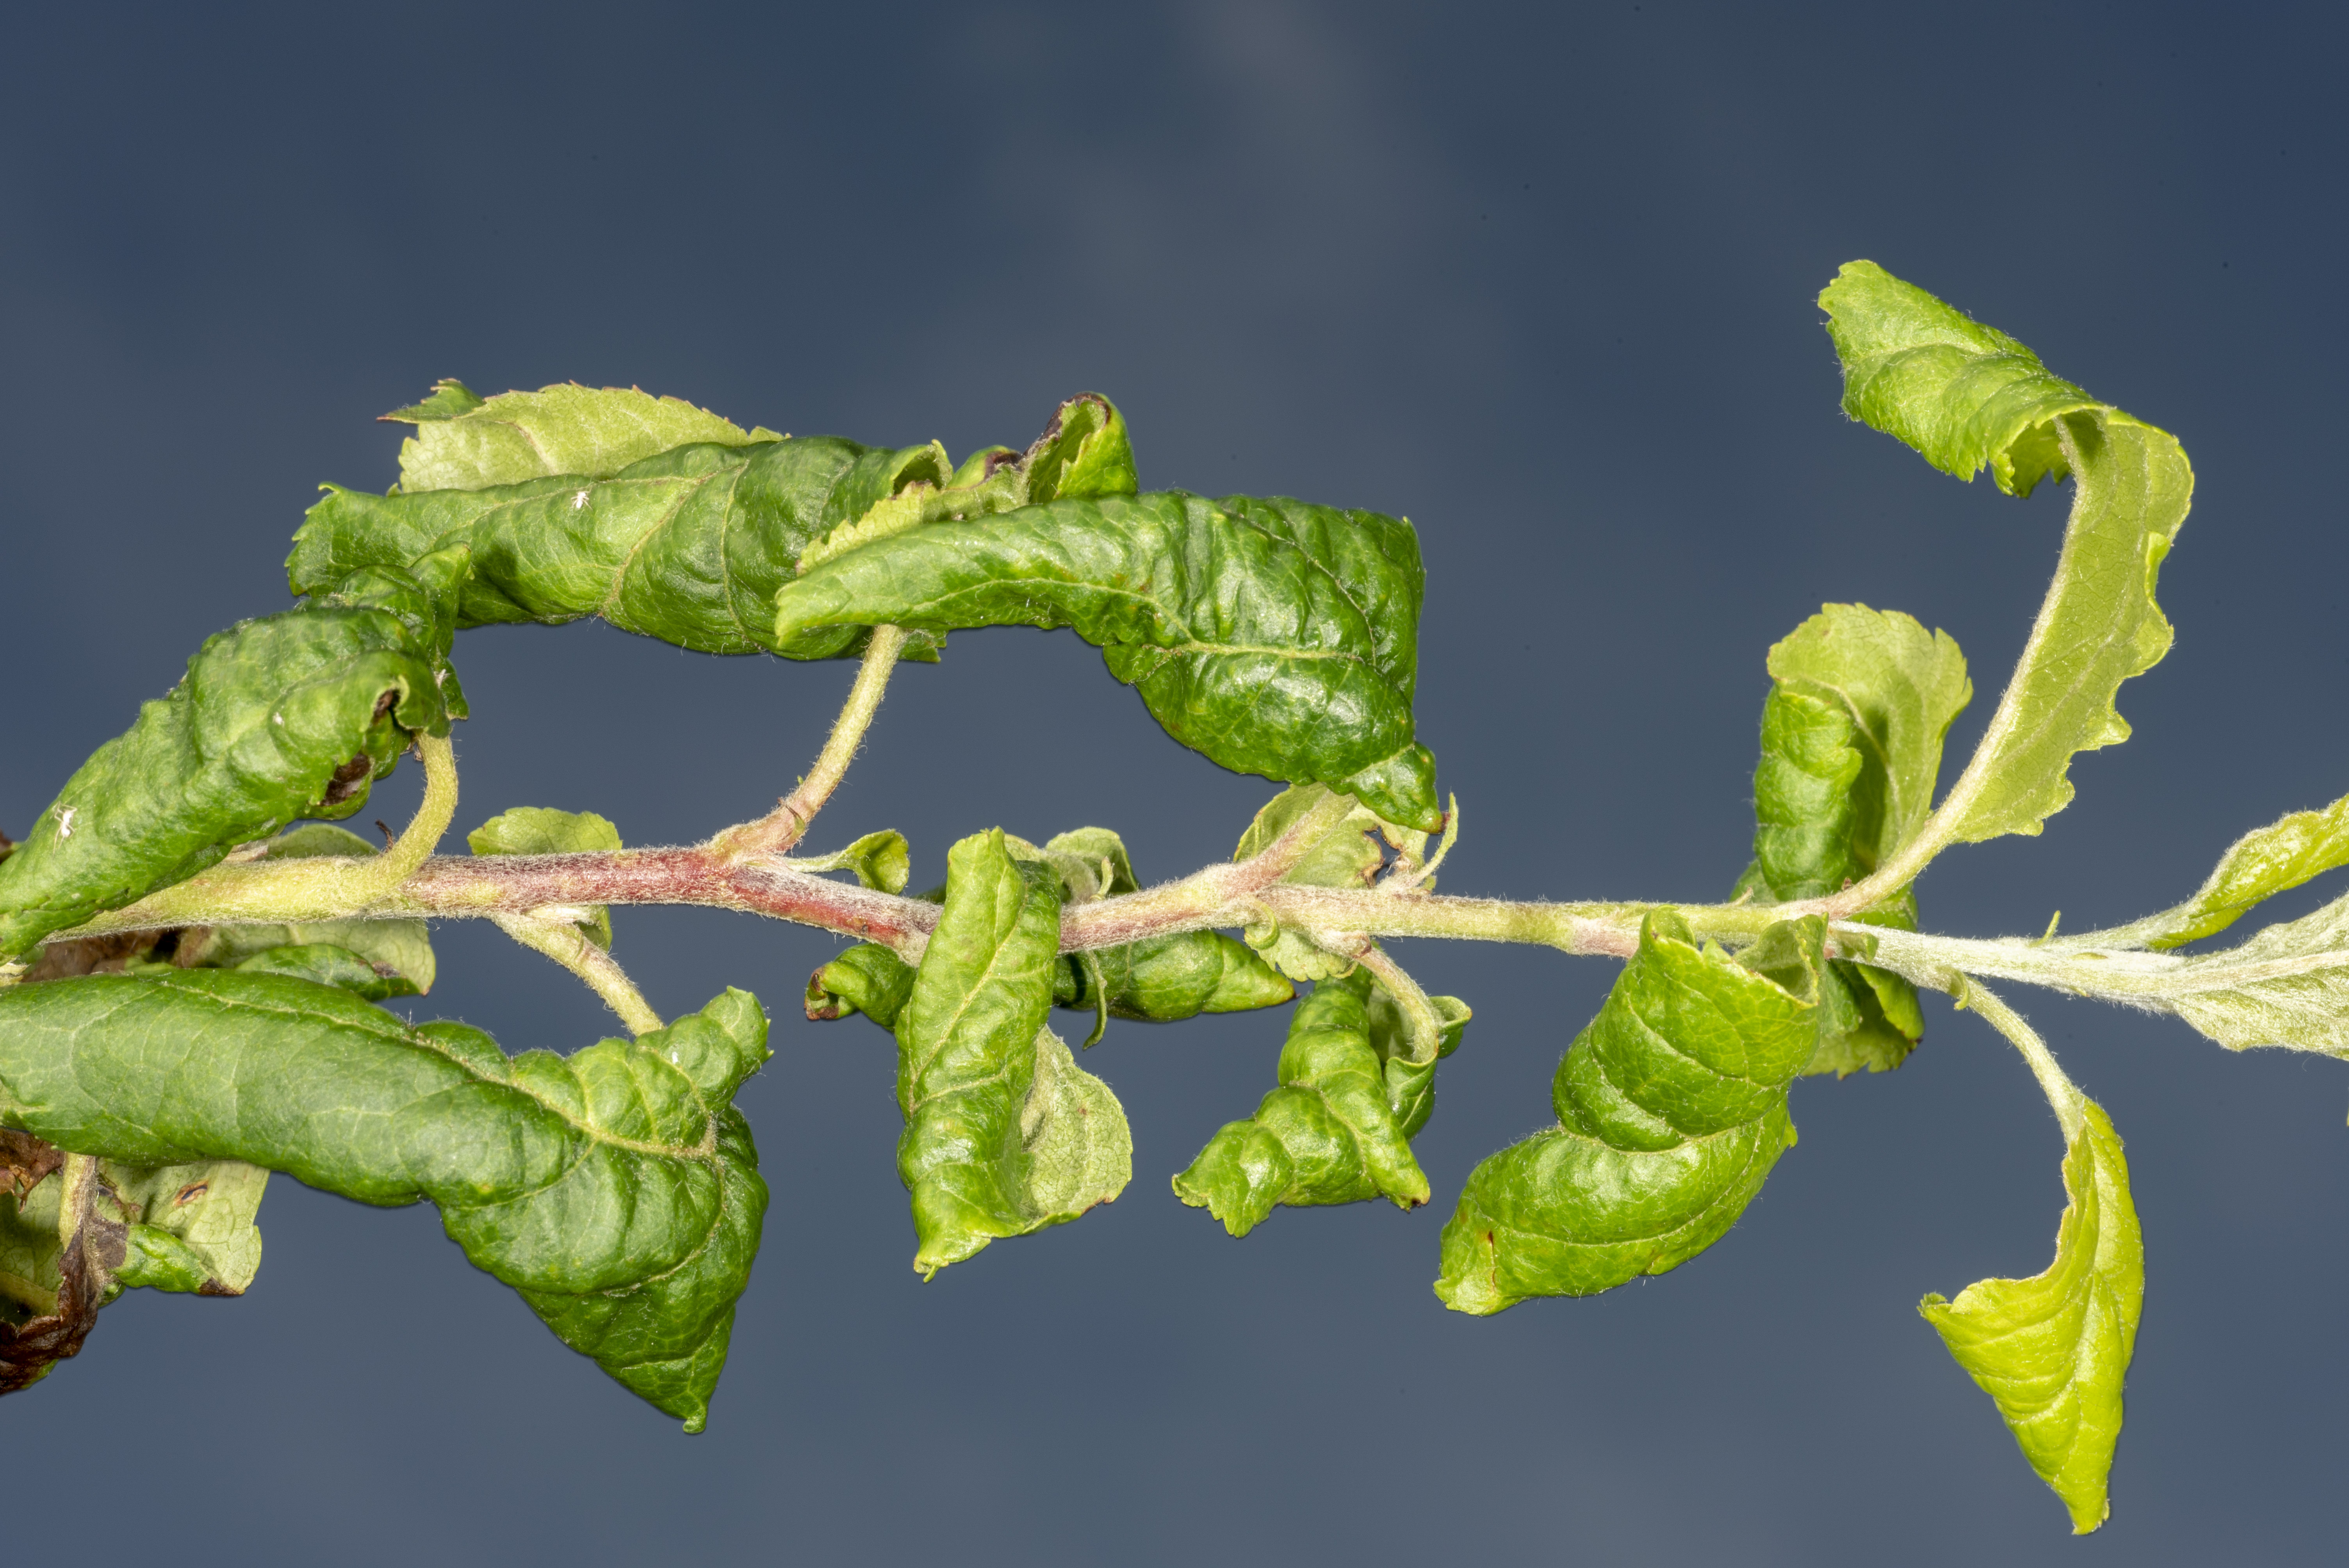 Figure 6. Damage caused by rosy apple aphid feeding on a young apple tree shoot.  (<em>Photo credit: John Obermeyer, Purdue Entomology</em>)